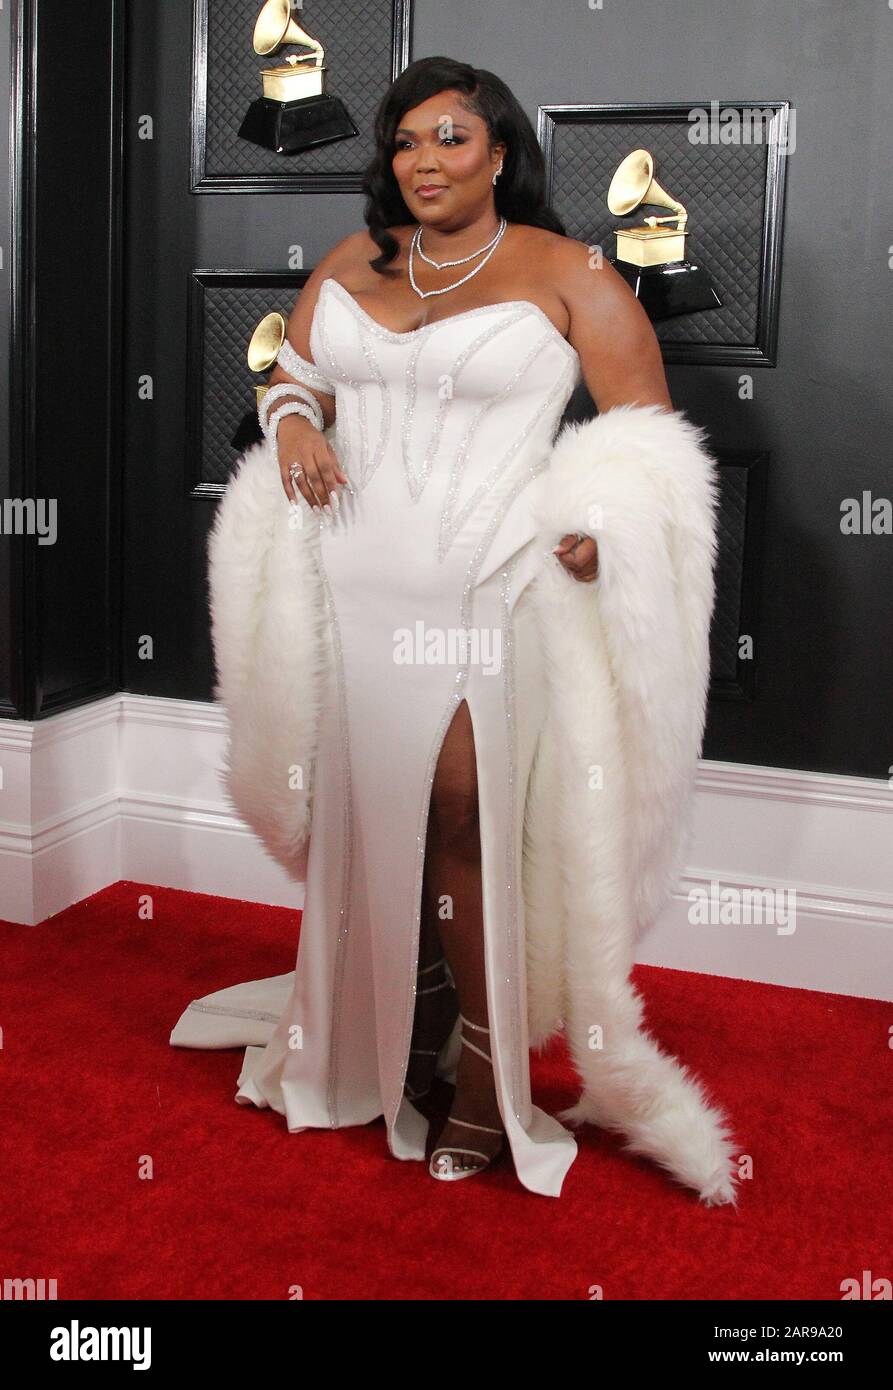 Los Angeles, USA. 26th Jan 2020. Lizzo. 62nd Annual GRAMMY Awards held at Staples Center. Photo Credit: AdMedia /MediaPunch Credit: MediaPunch Inc/Alamy Live News Stock Photo